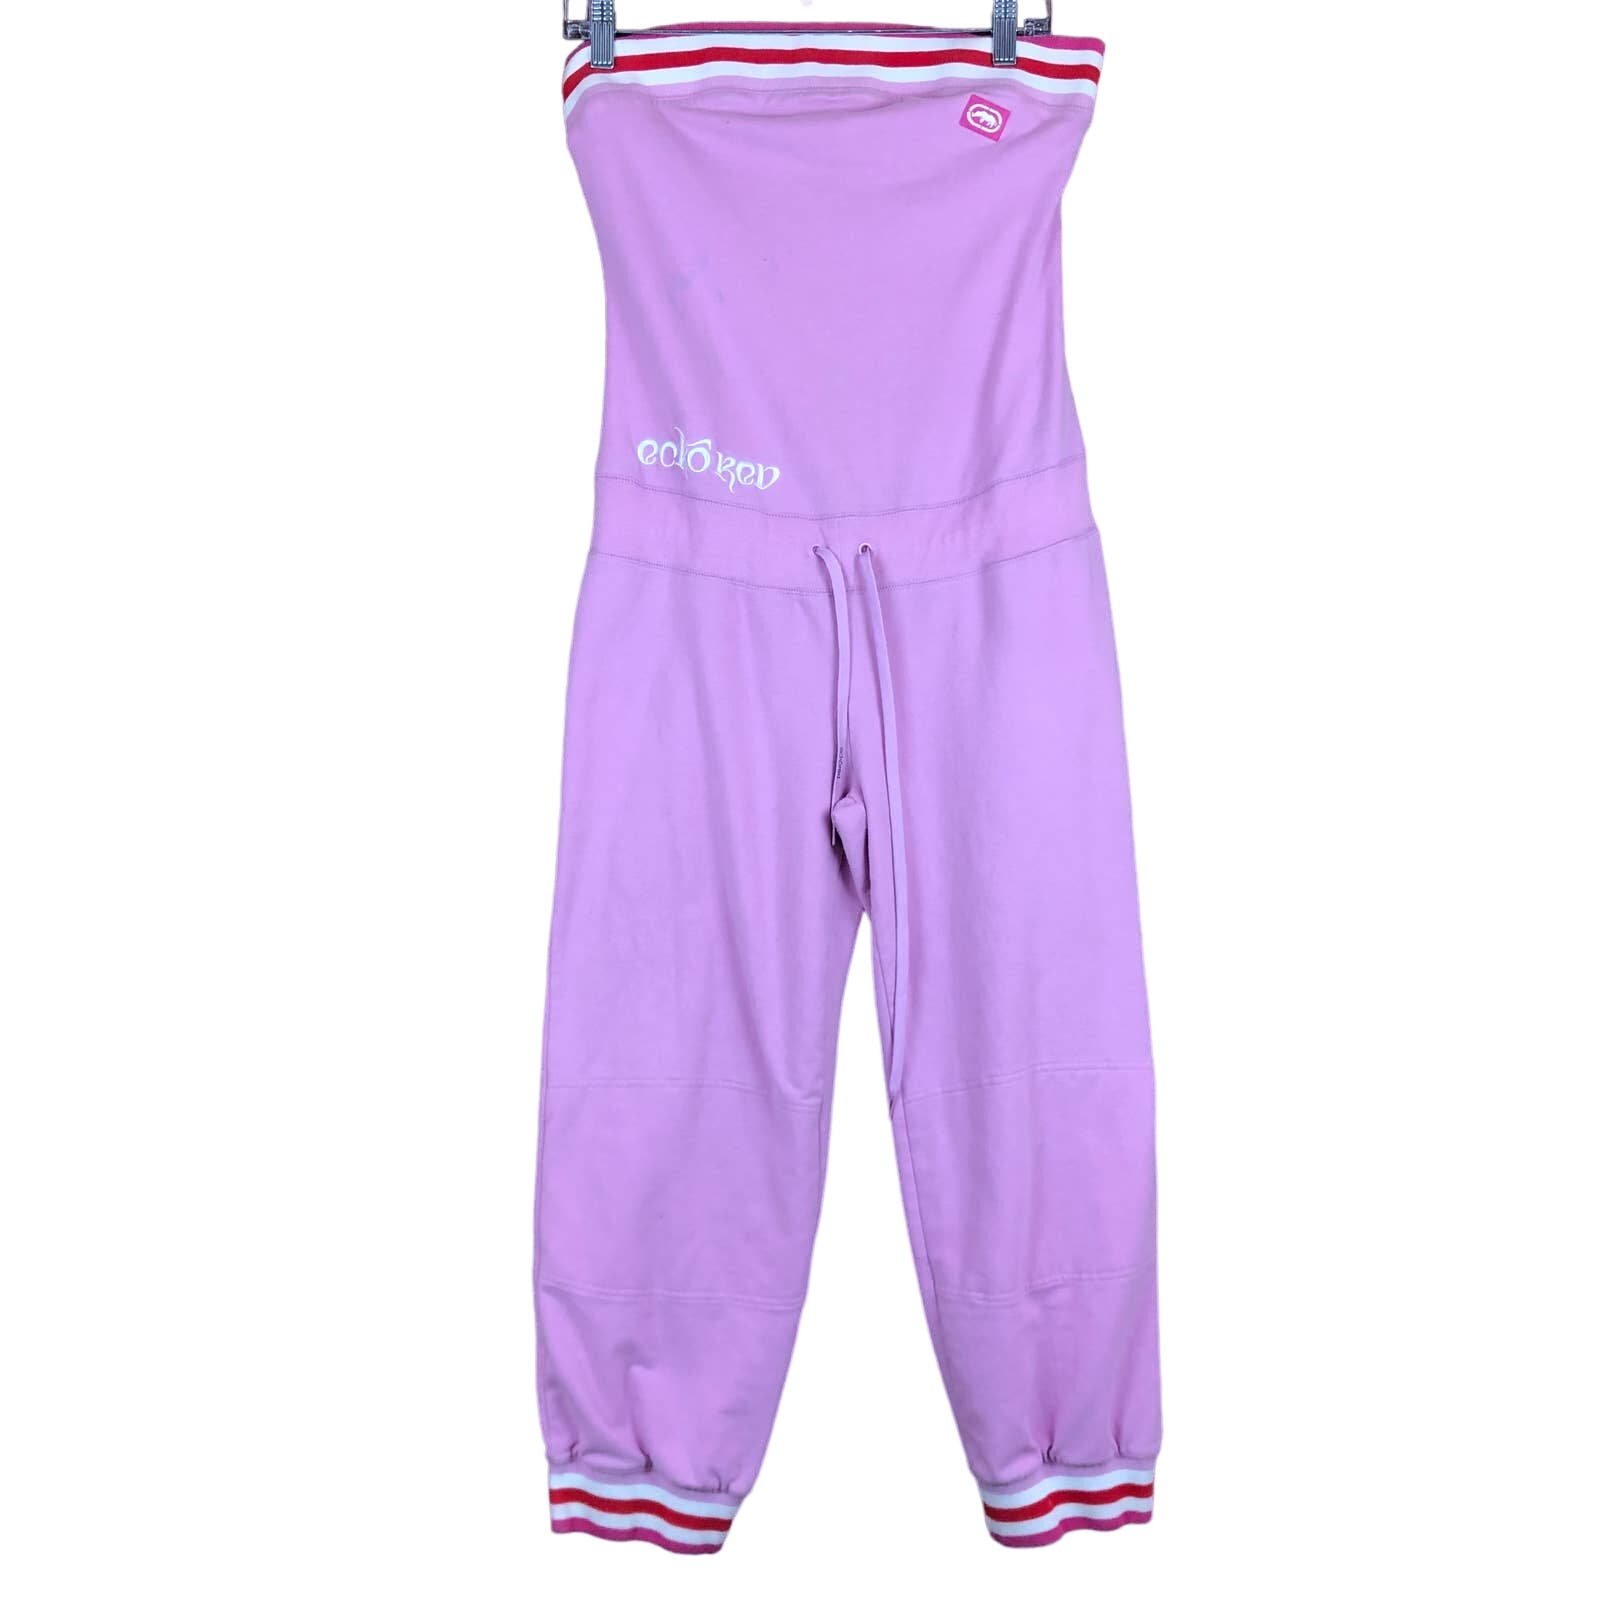 save up to 70% Vintage Ecko Red Womens Romper Pink Tube